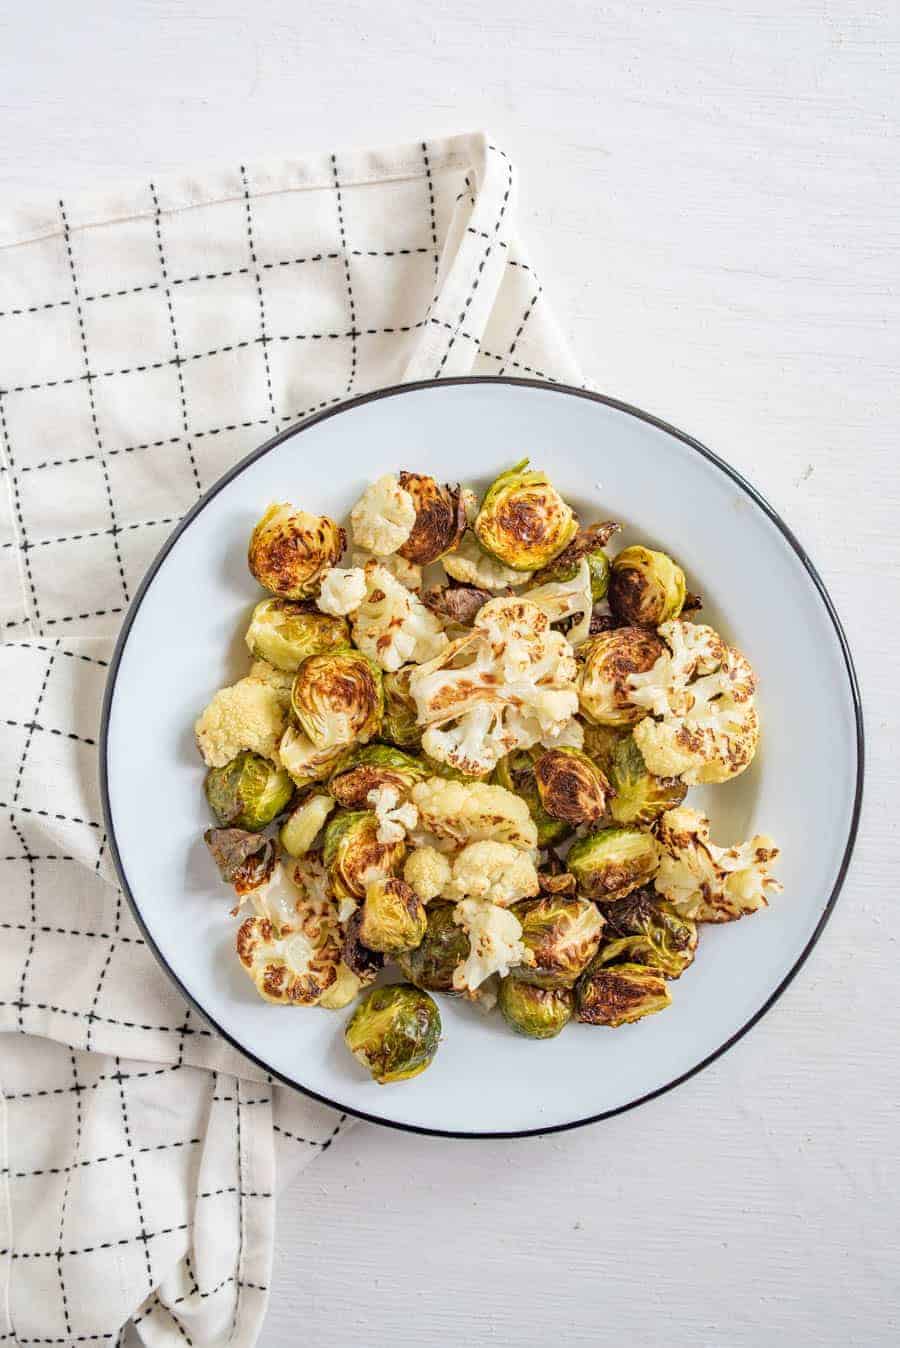 Roasted Brussels Sprouts and Cauliflower is one of our all-time favorite healthy vegetable side dishes that the whole family loves to eat. 